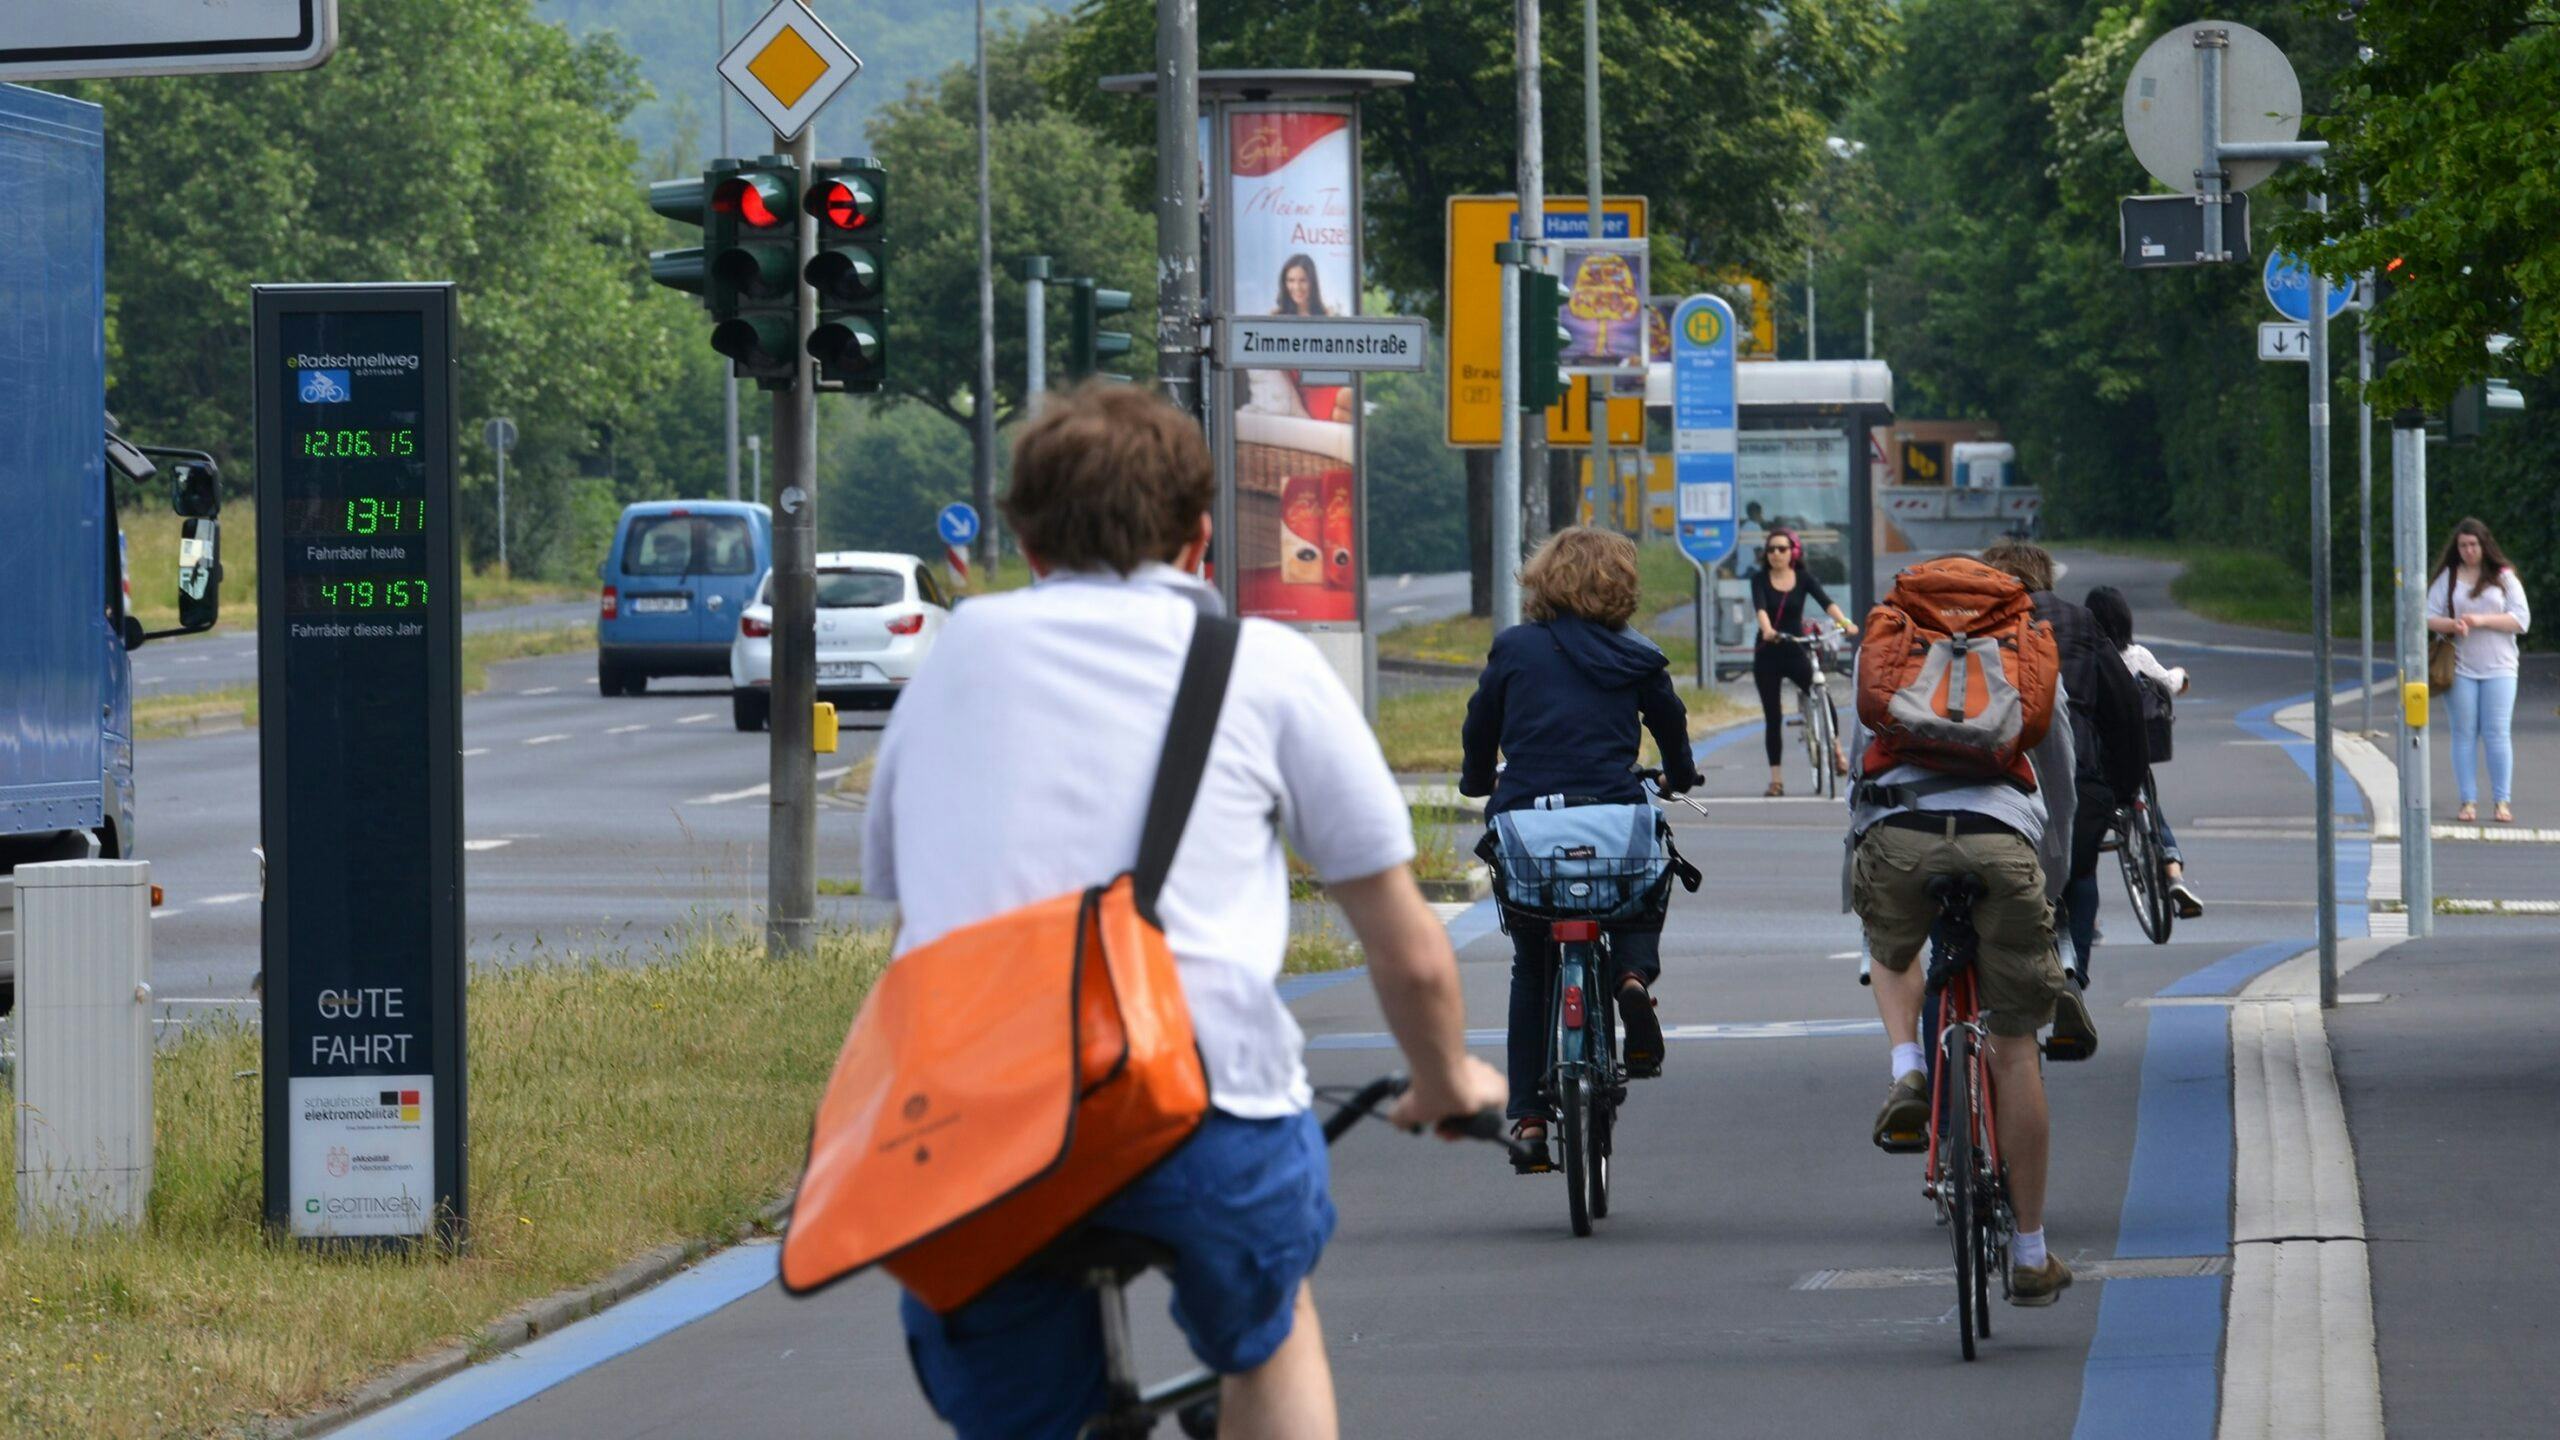 E-bike and bicycle sales in Germany are still on a high level. Next year there will be more e-bikes and bicycles than inhabitants. – Photo ADFC